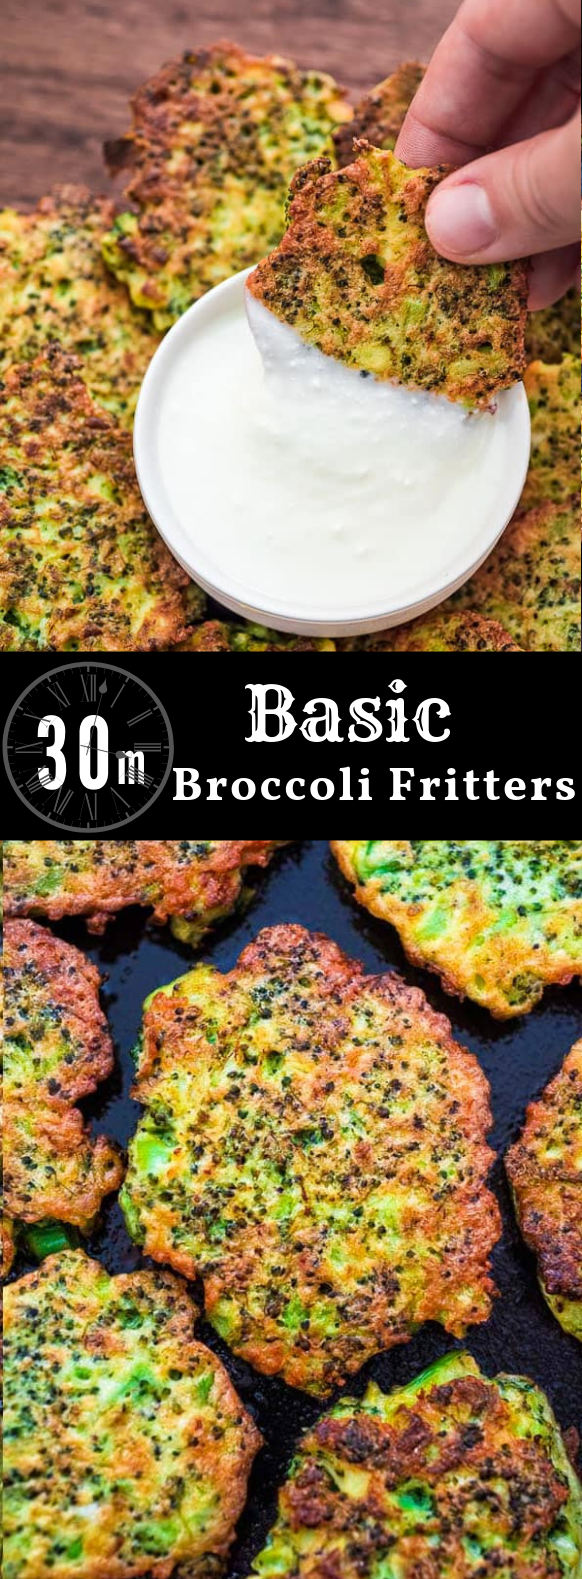 BASIC BROCCOLI FRITTERS #Vegetarian #Meals